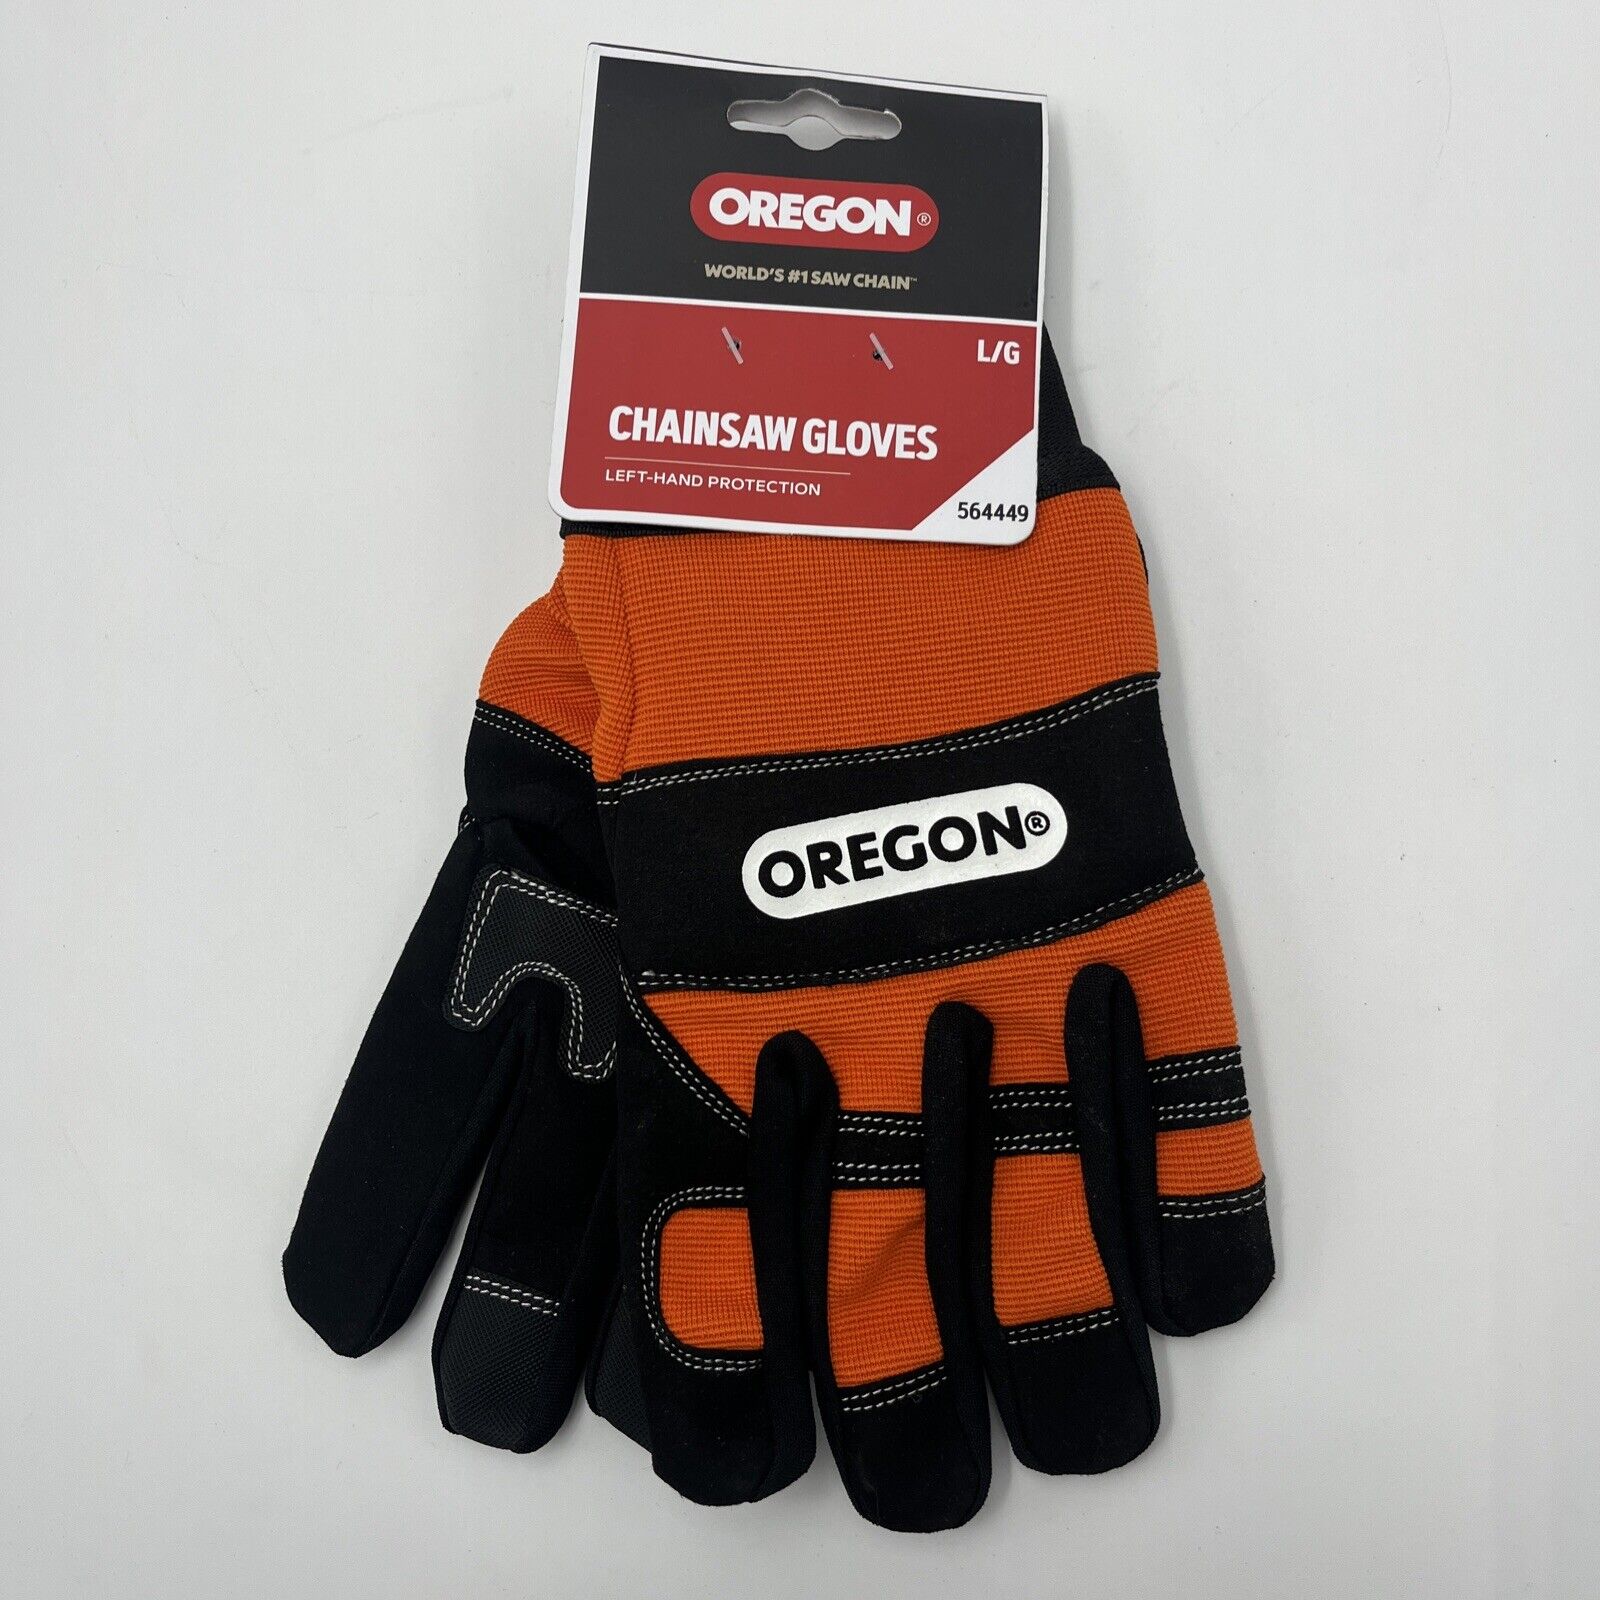 Oregon Chainsaw Gloves Protection 1pair Size Large Left Hand Protection Orange